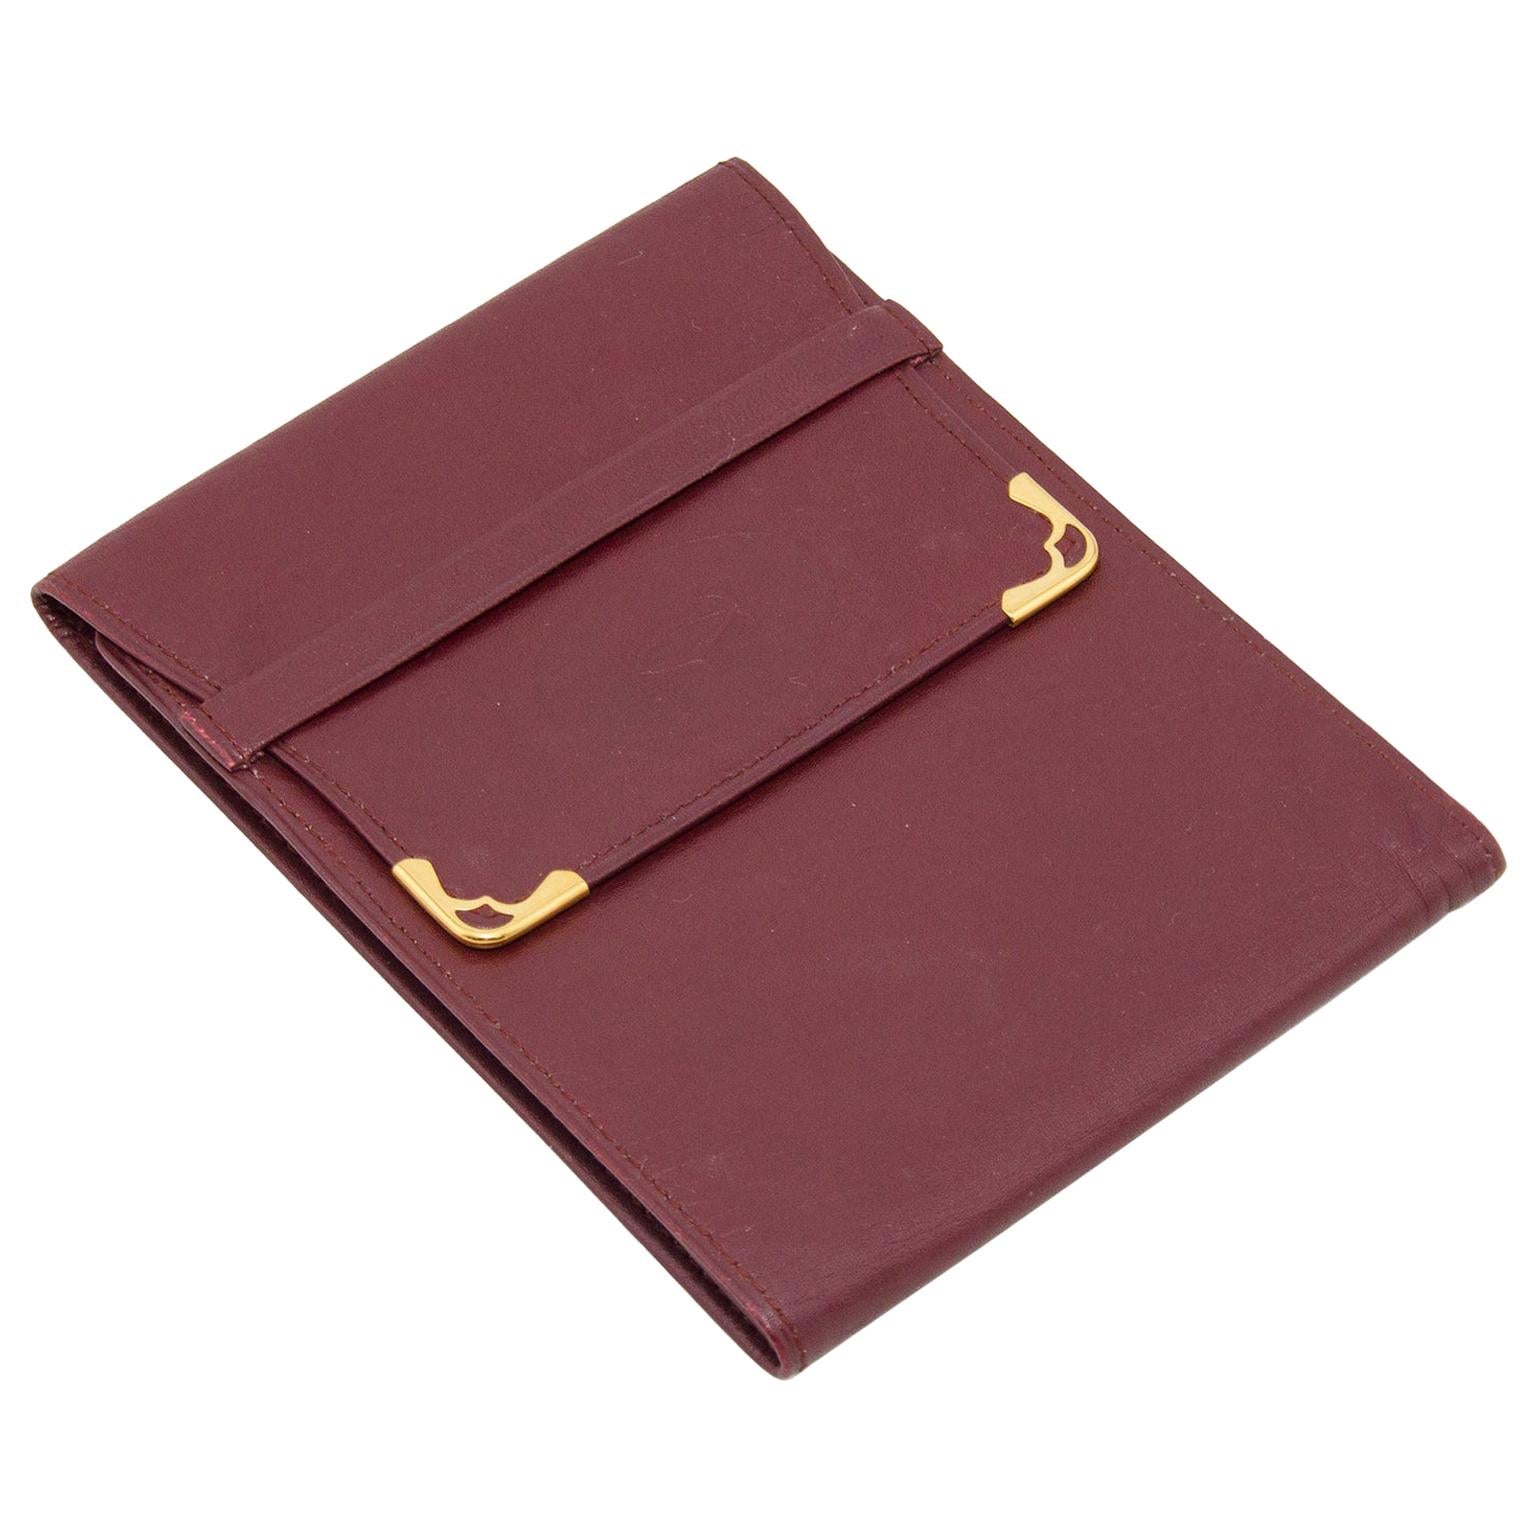 1980s Cartier Burgundy Leather Billfold Wallet With Fold-Over Closure